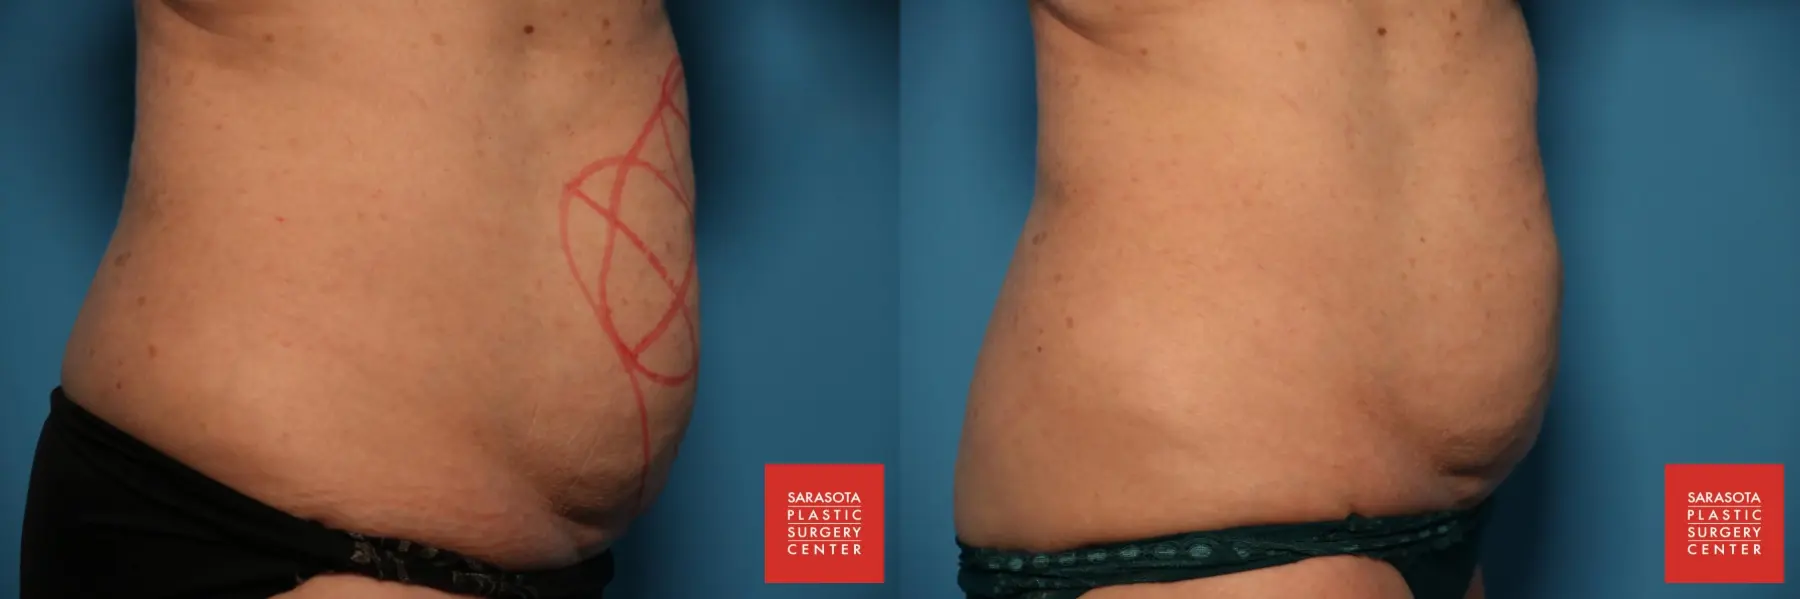 CoolSculpting®: Patient 7 - Before and After 4